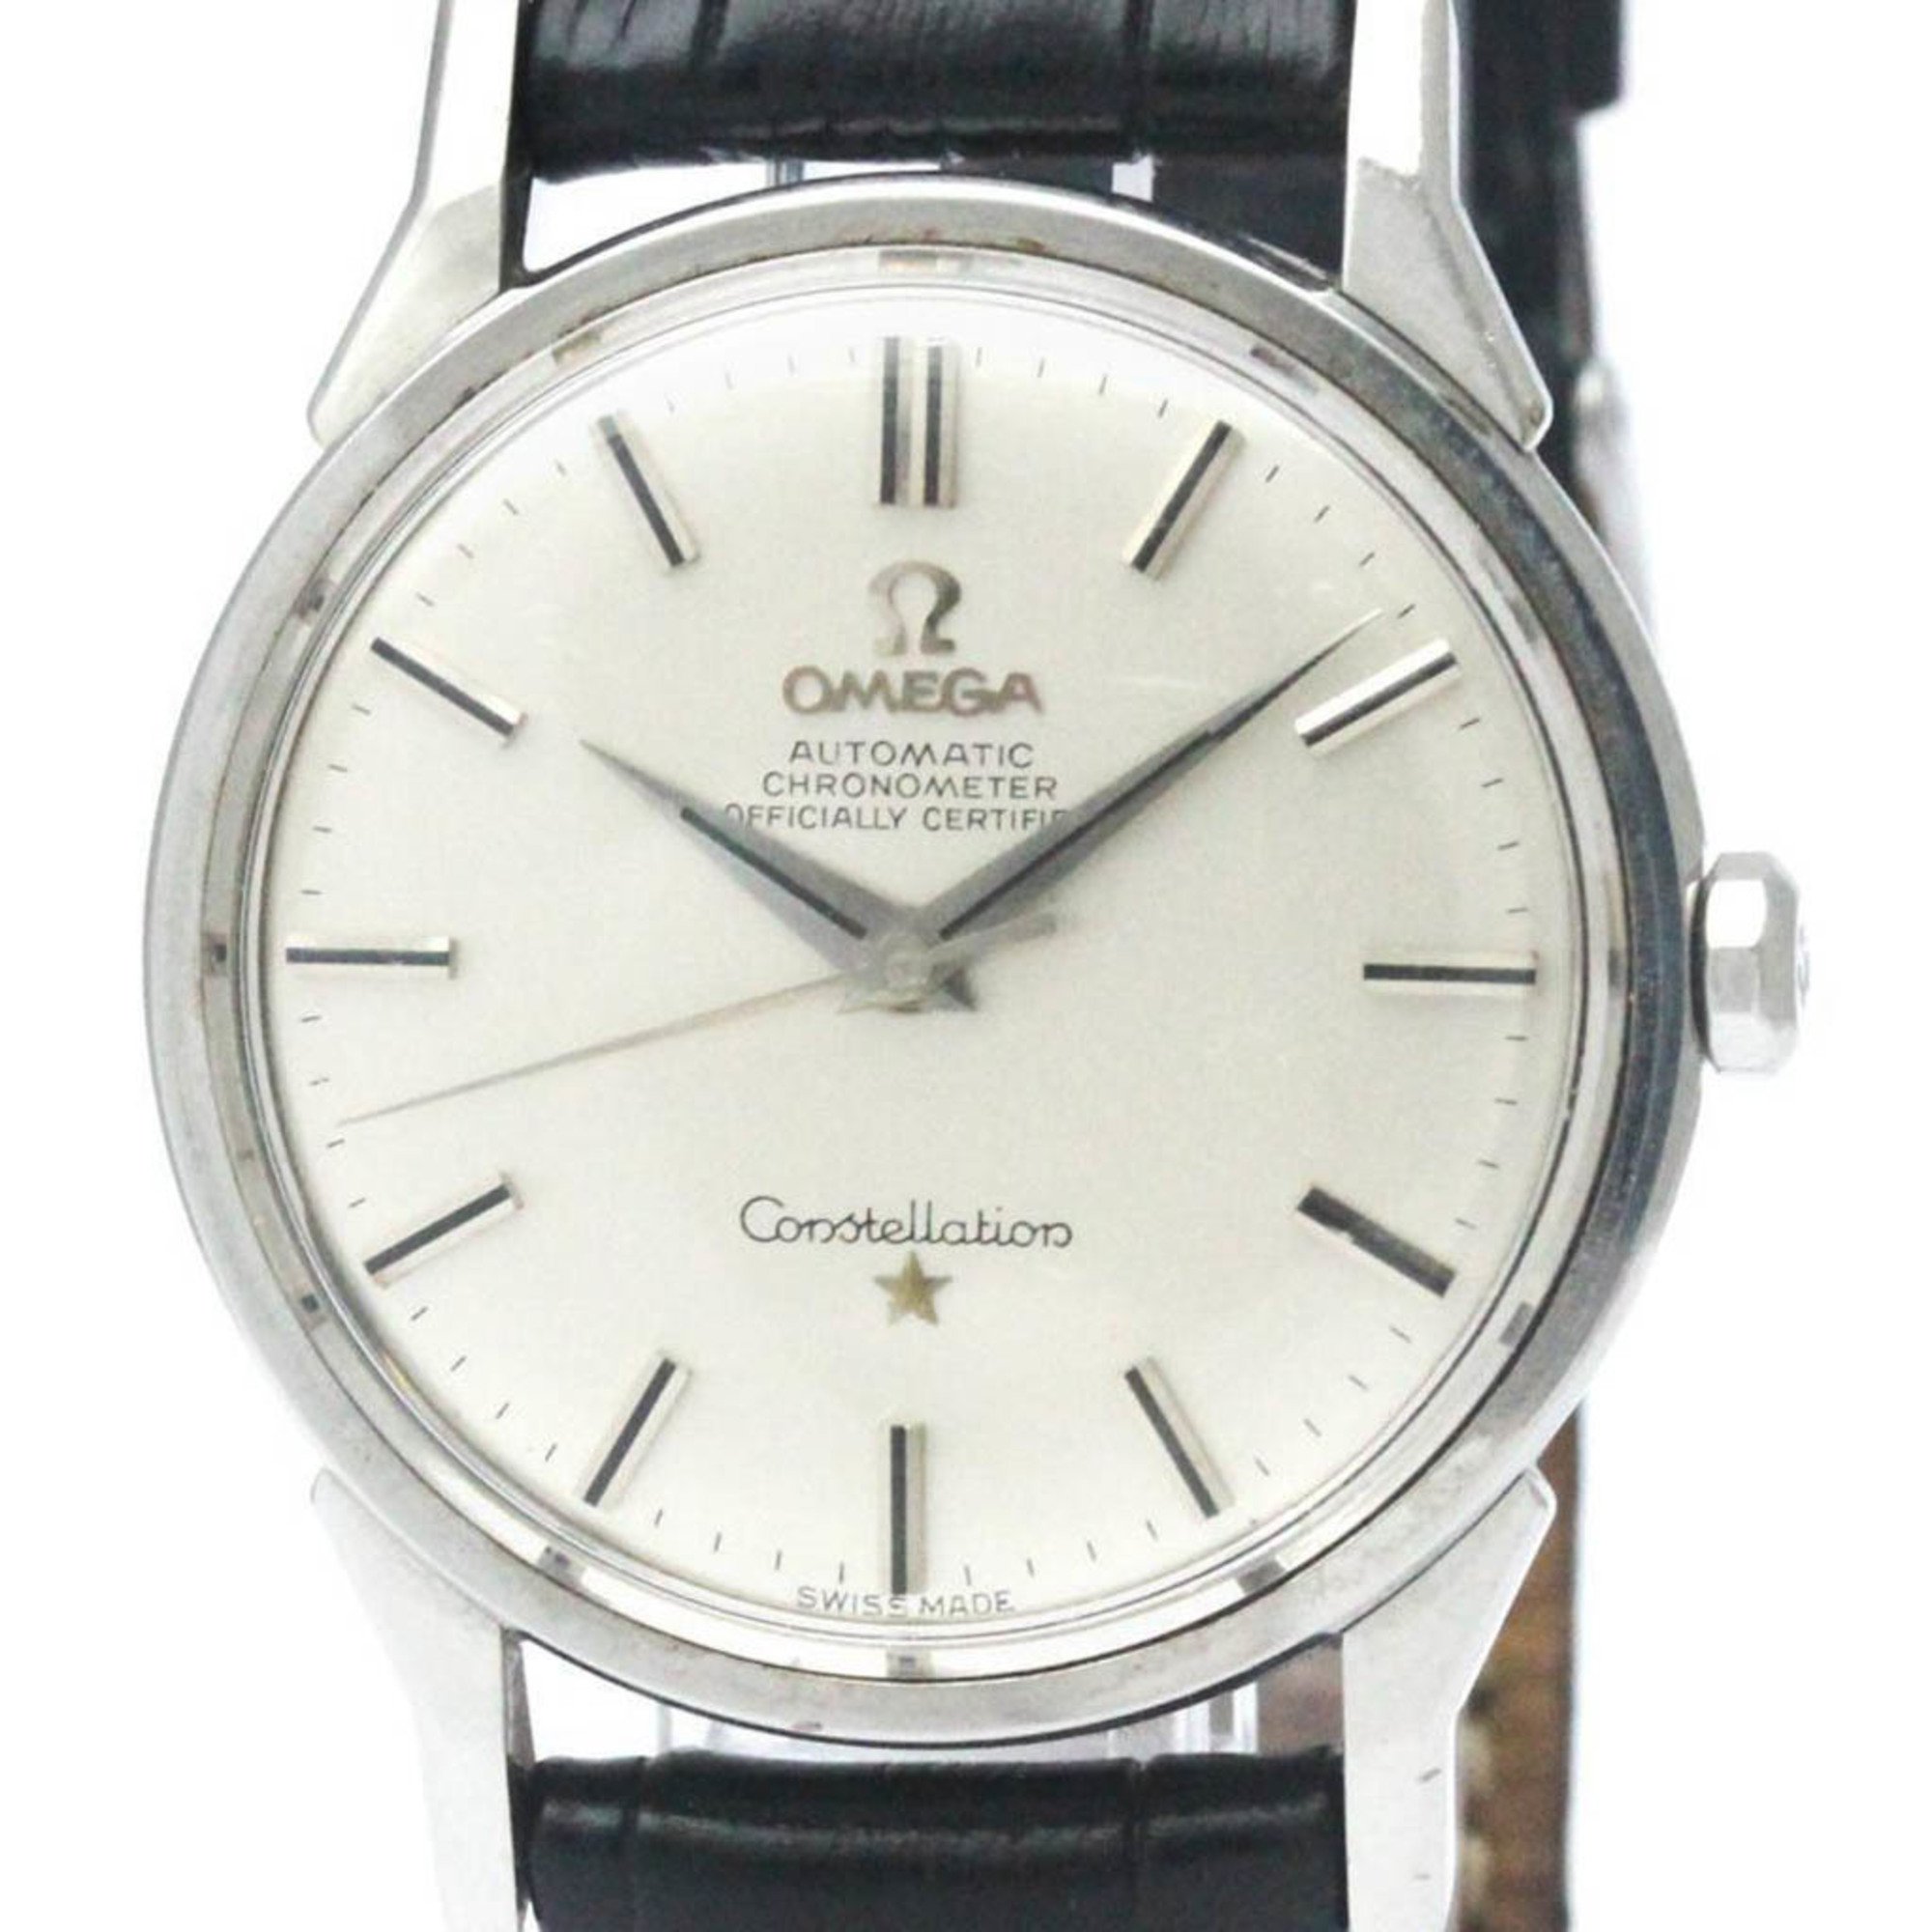 Vintage OMEGA Constellation Cal 551 Steel Automatic Mens Watch 167.005 BF567952